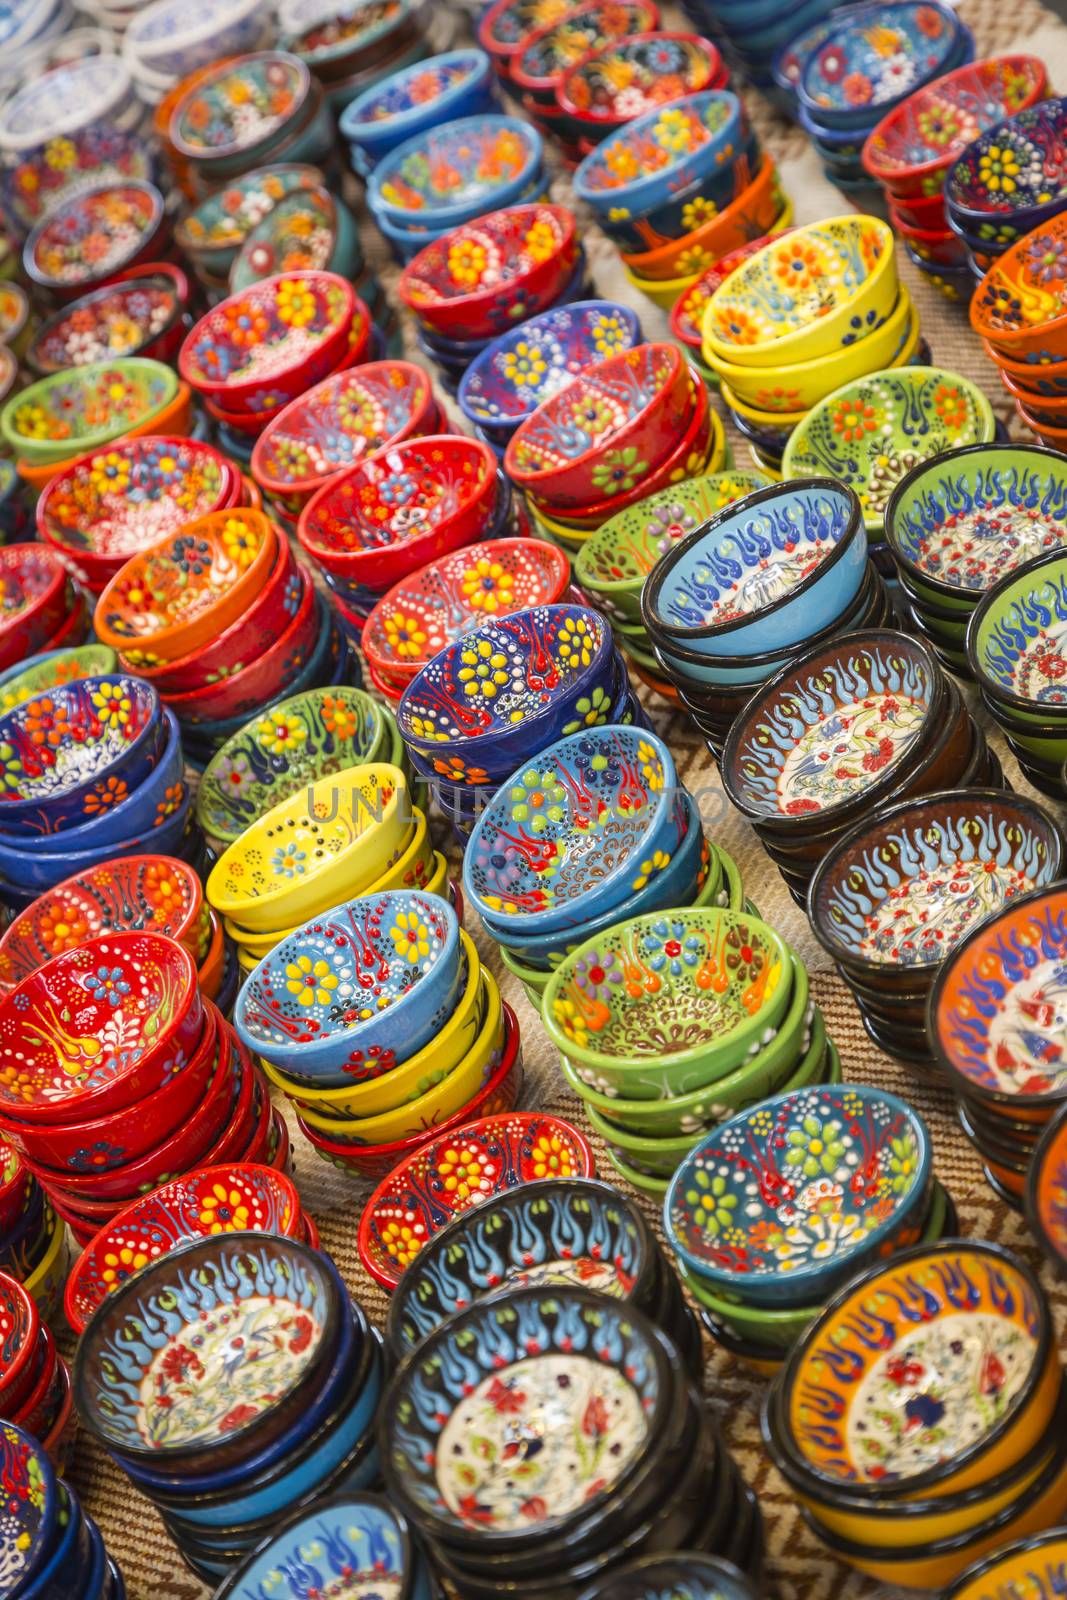 Beautiful Hand Painted Turkish Bowls on Table at the Market.